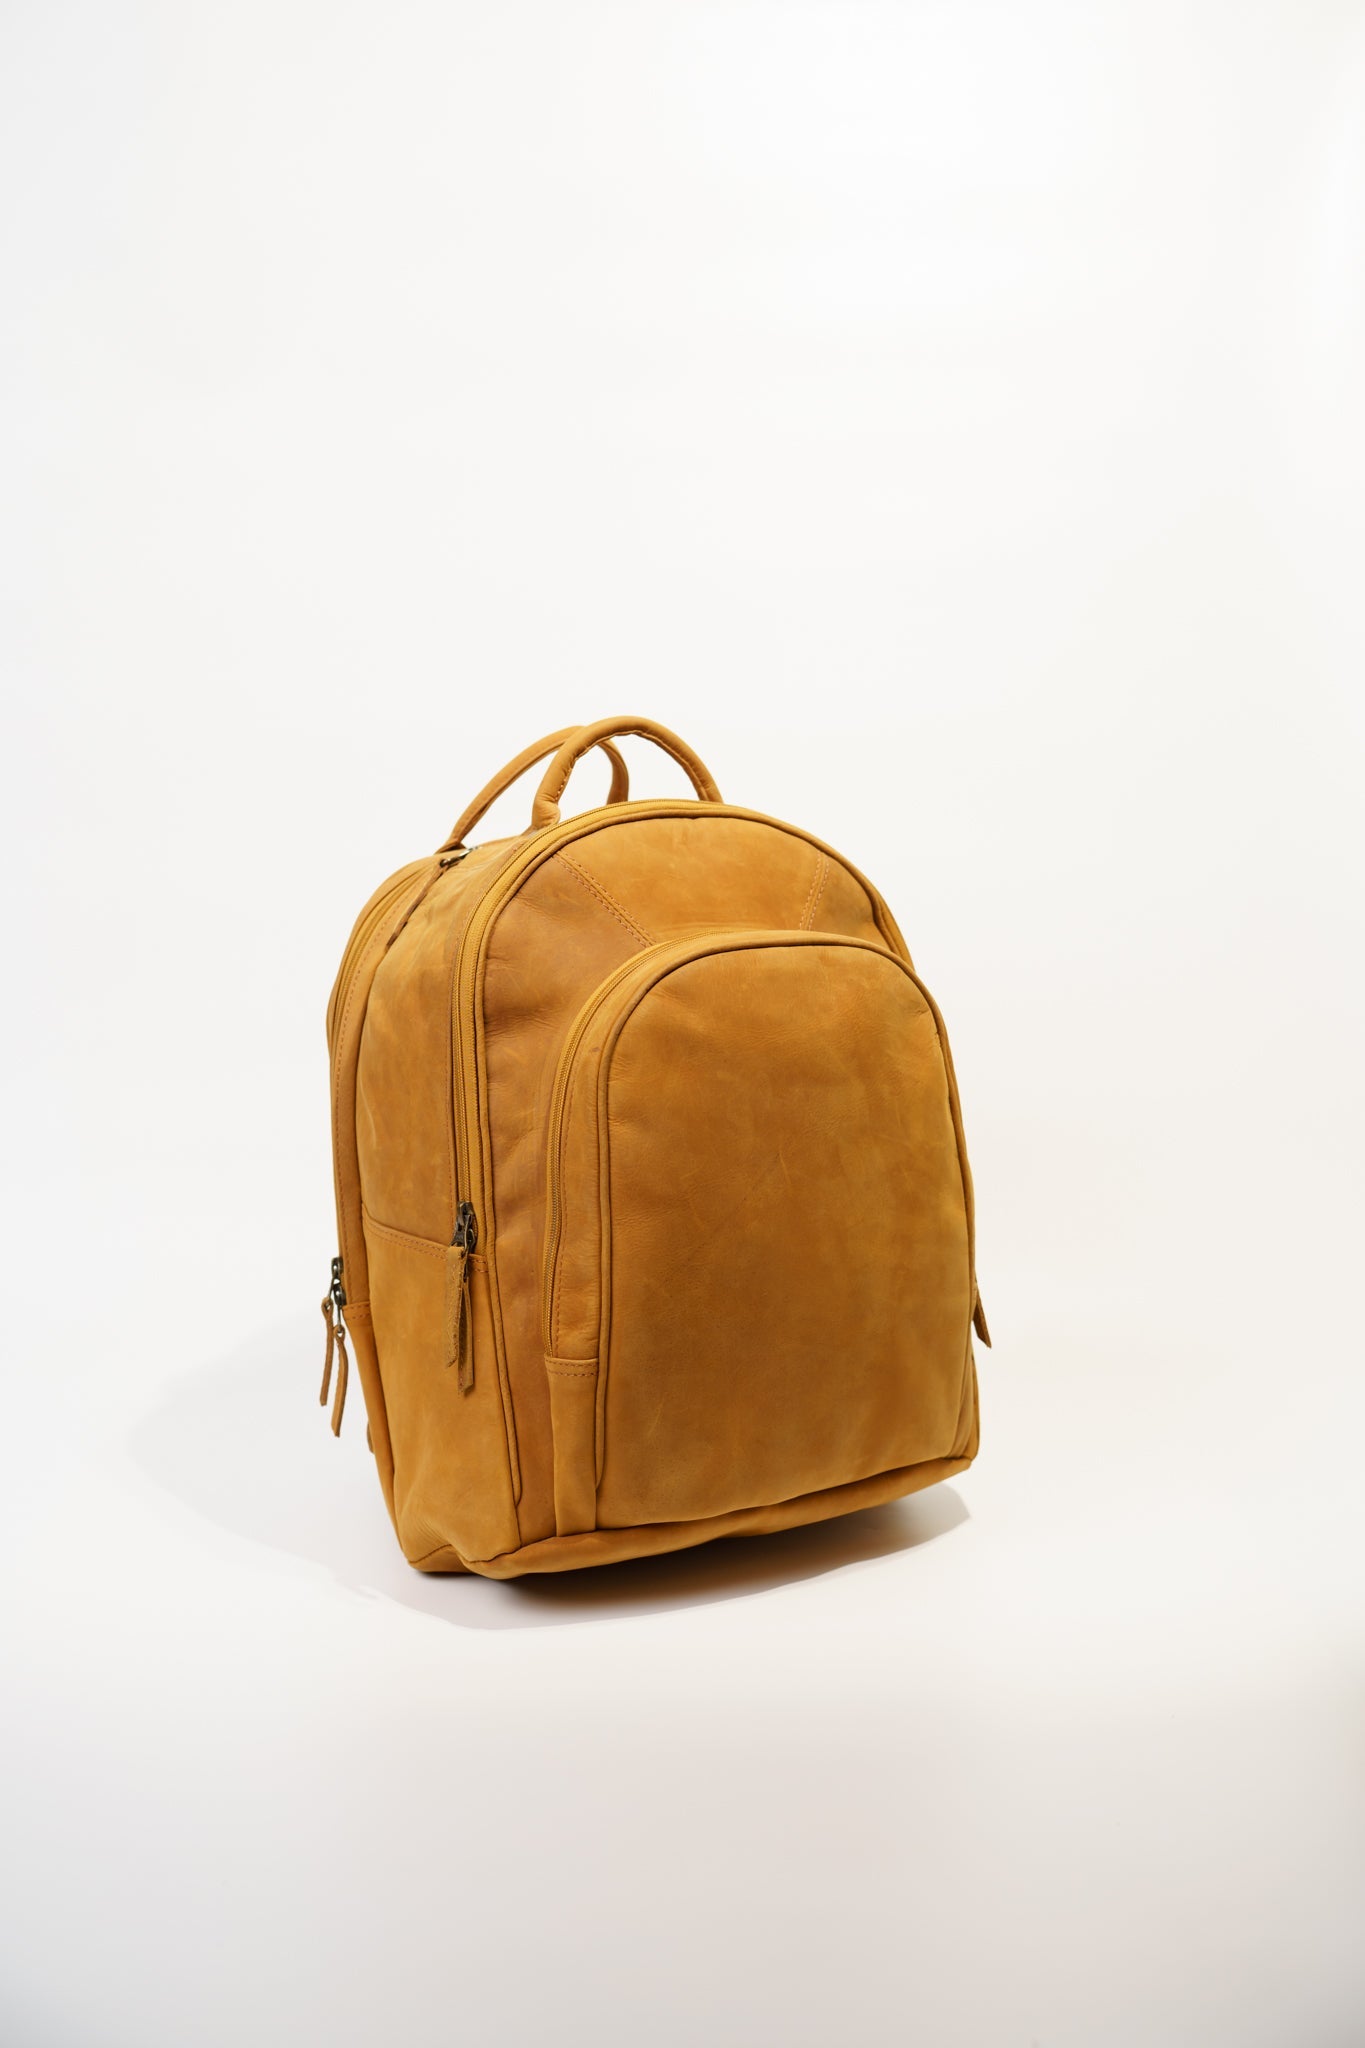 Leather Backpack for Travel & Utility